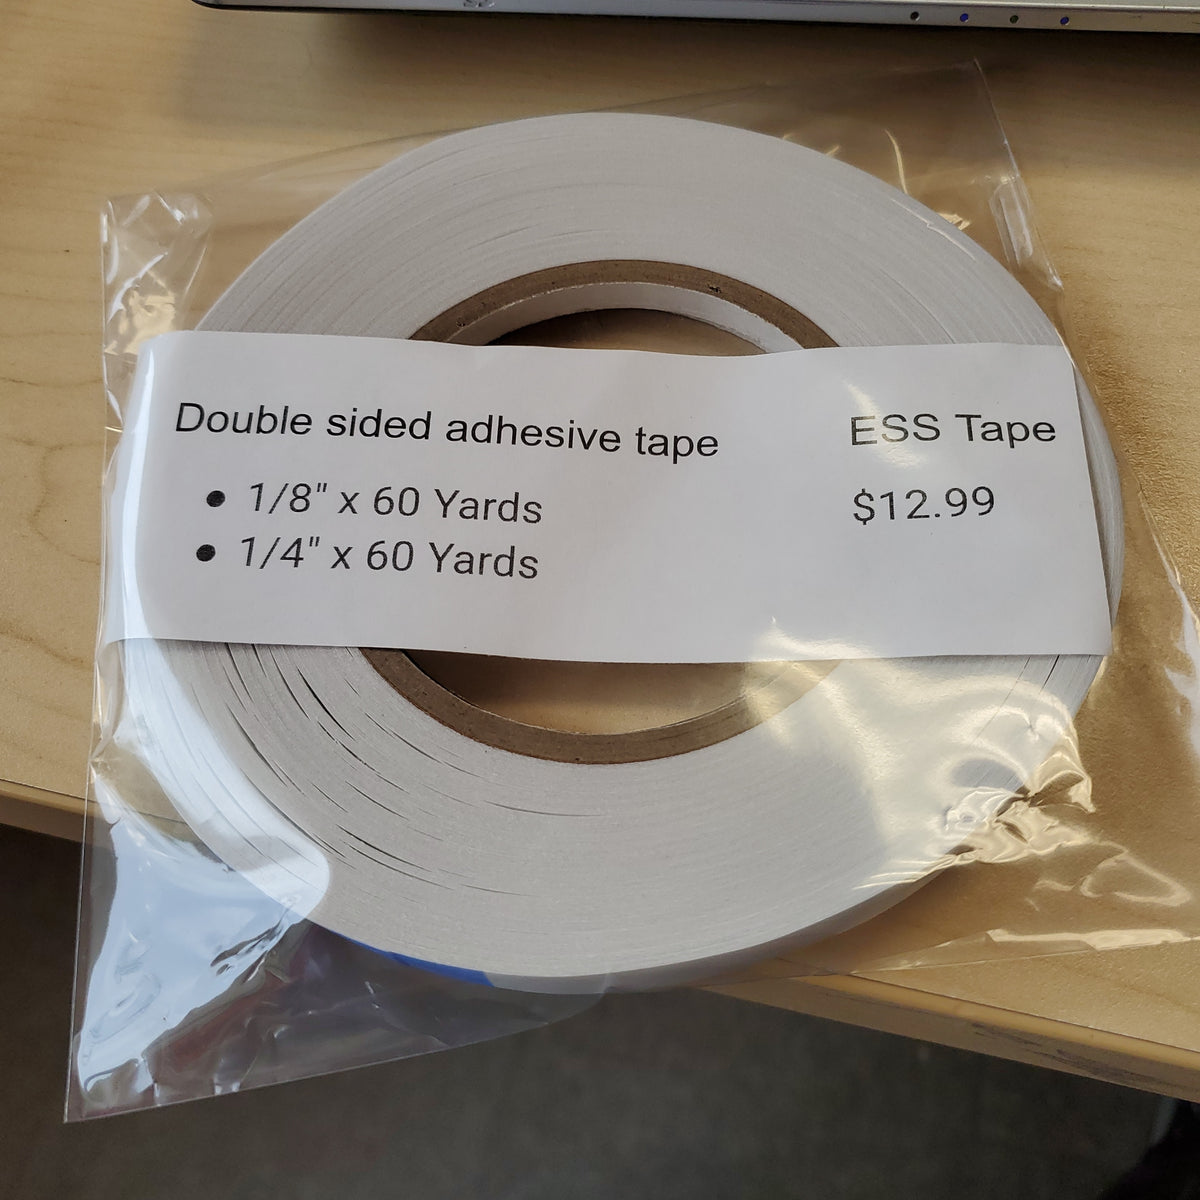 Scor-Tape Double-Sided Adhesive